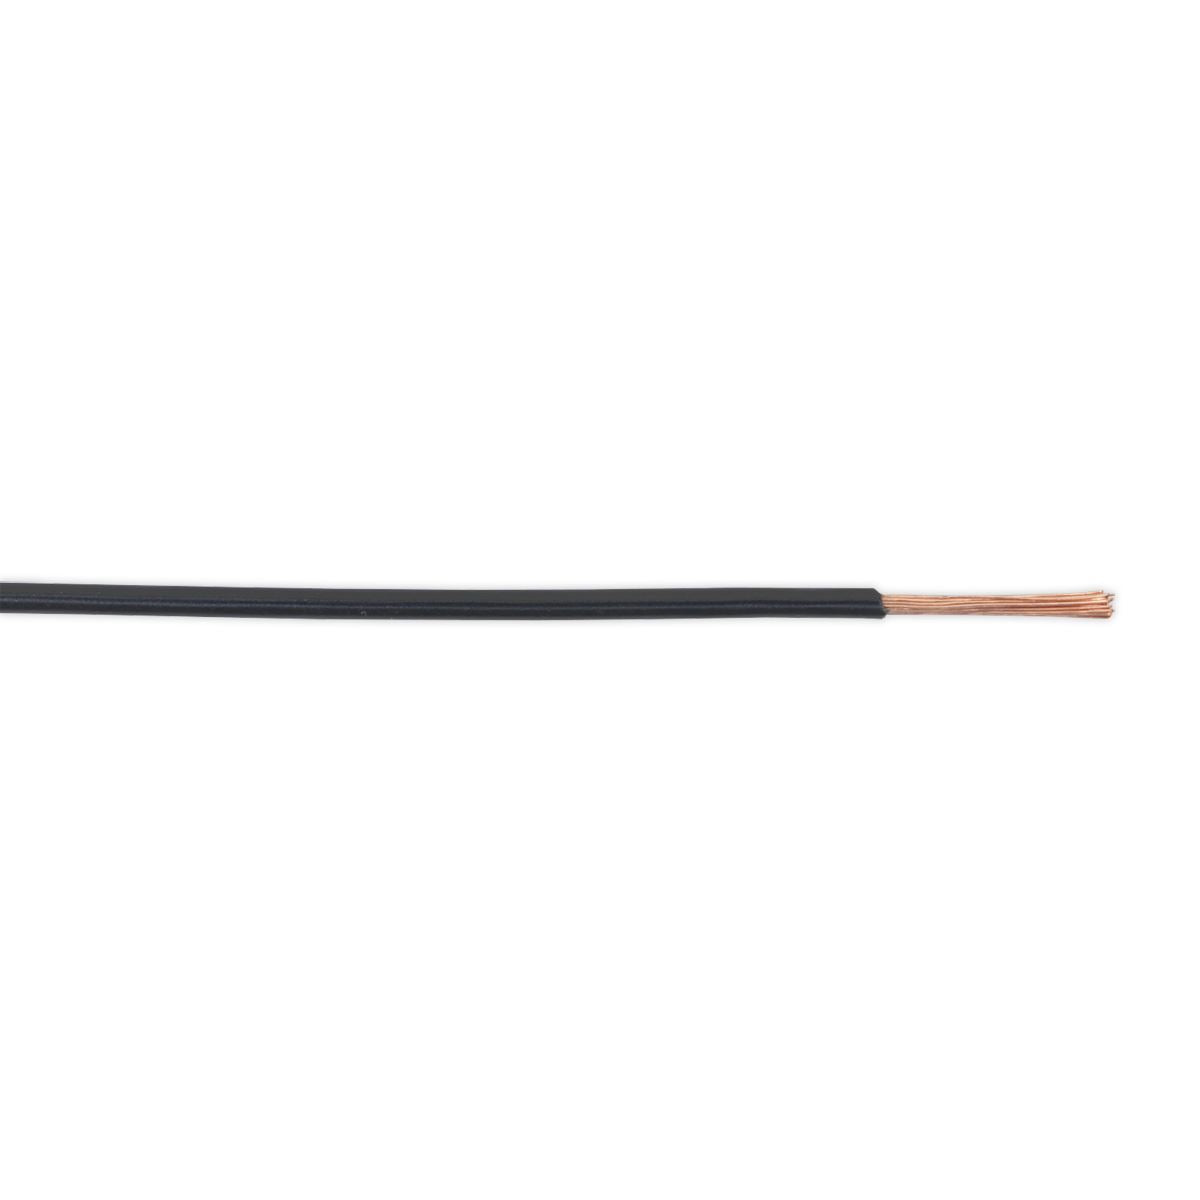 Sealey Automotive Cable Thin Wall Single 1mm² 32/0.20mm 50m Black